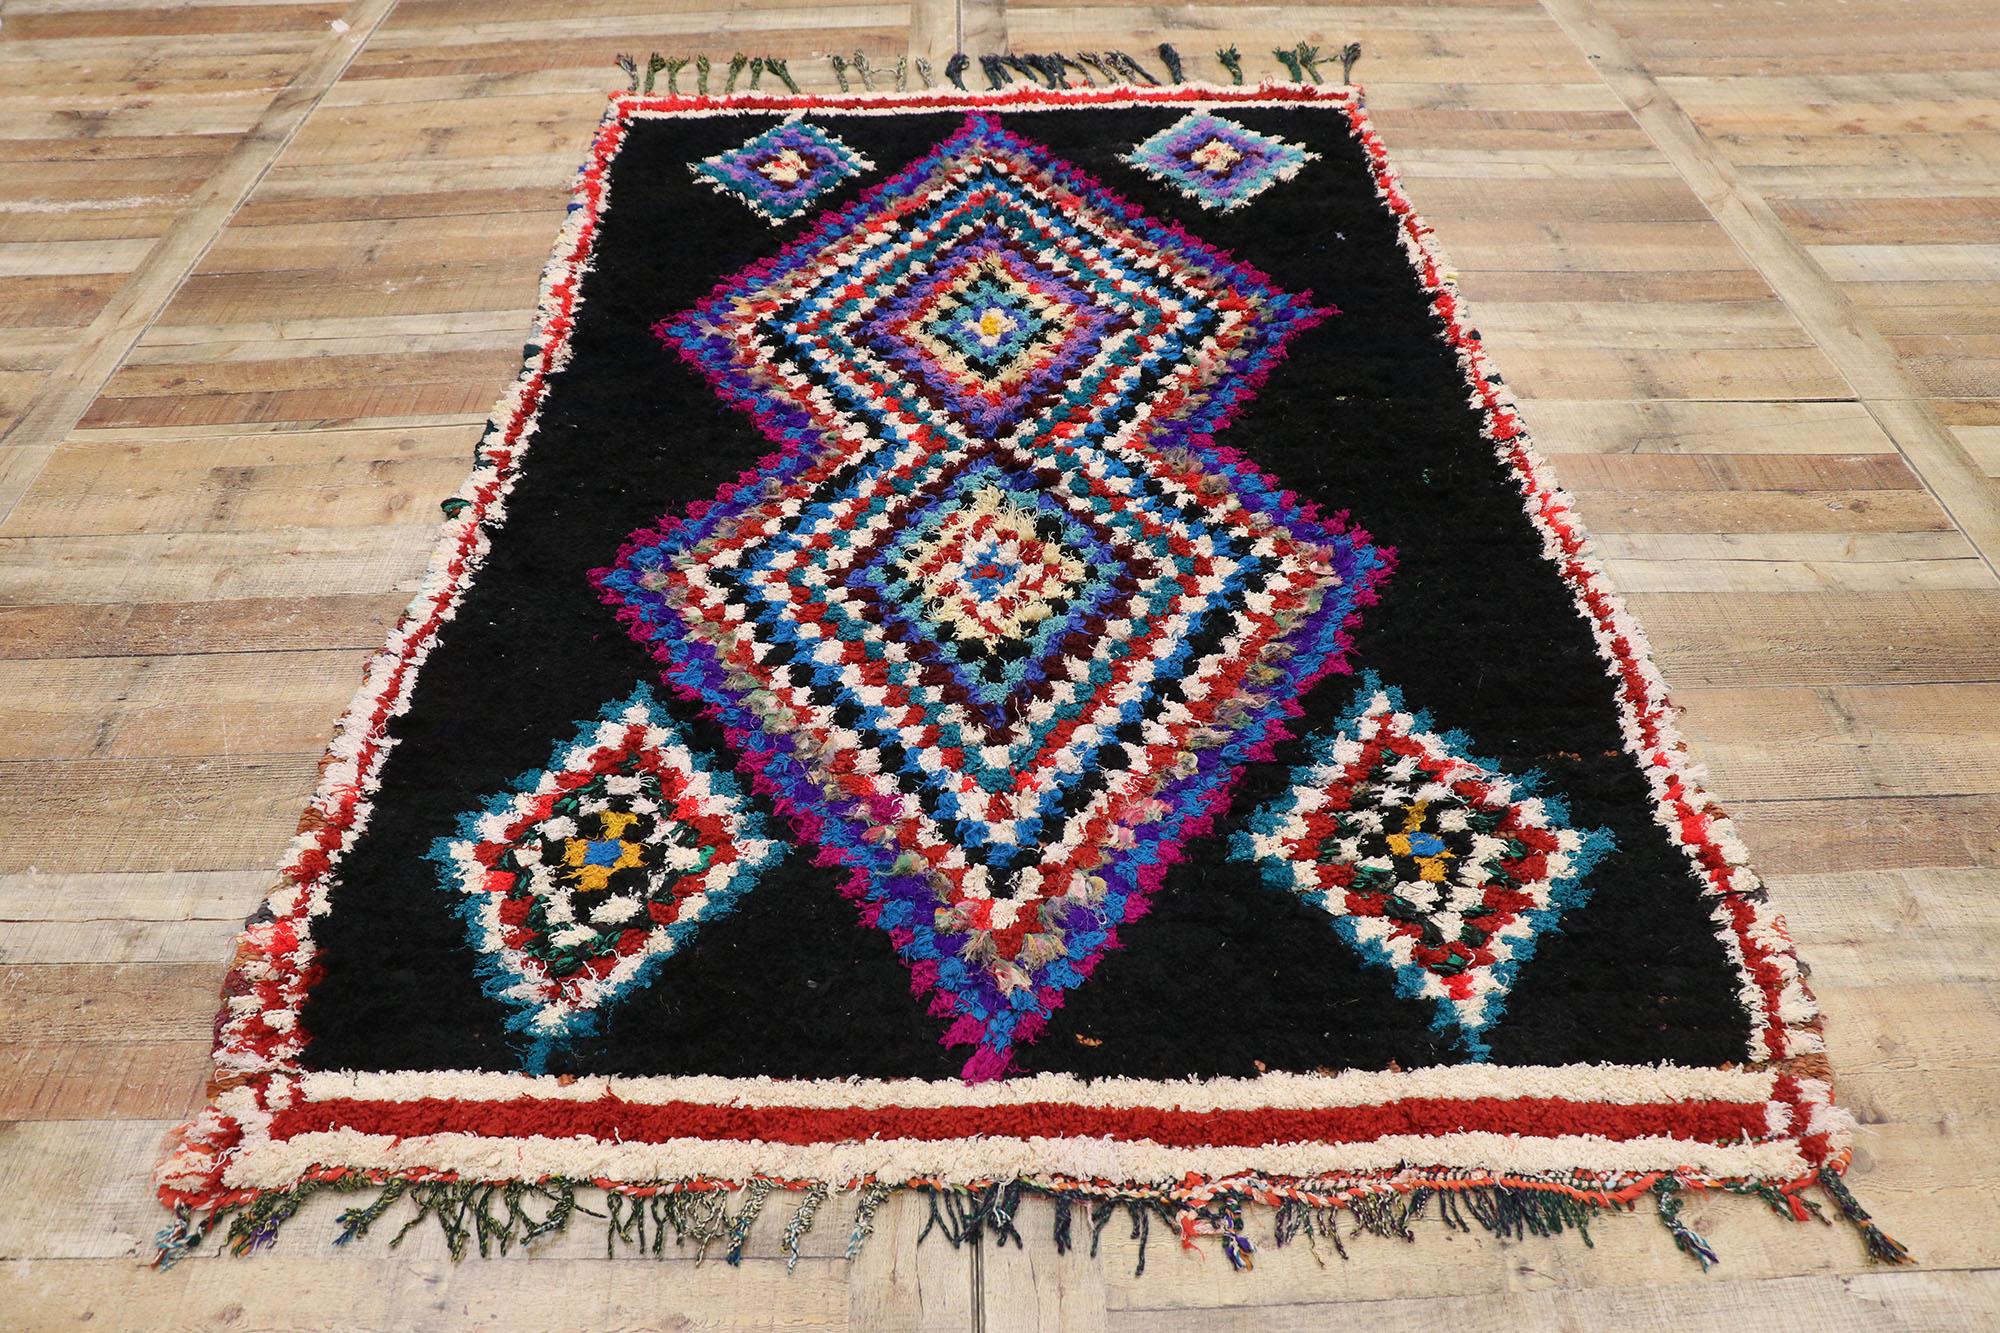 Vintage Berber Moroccan Boucherouite Rug with Boho Chic Tribal Style For Sale 1